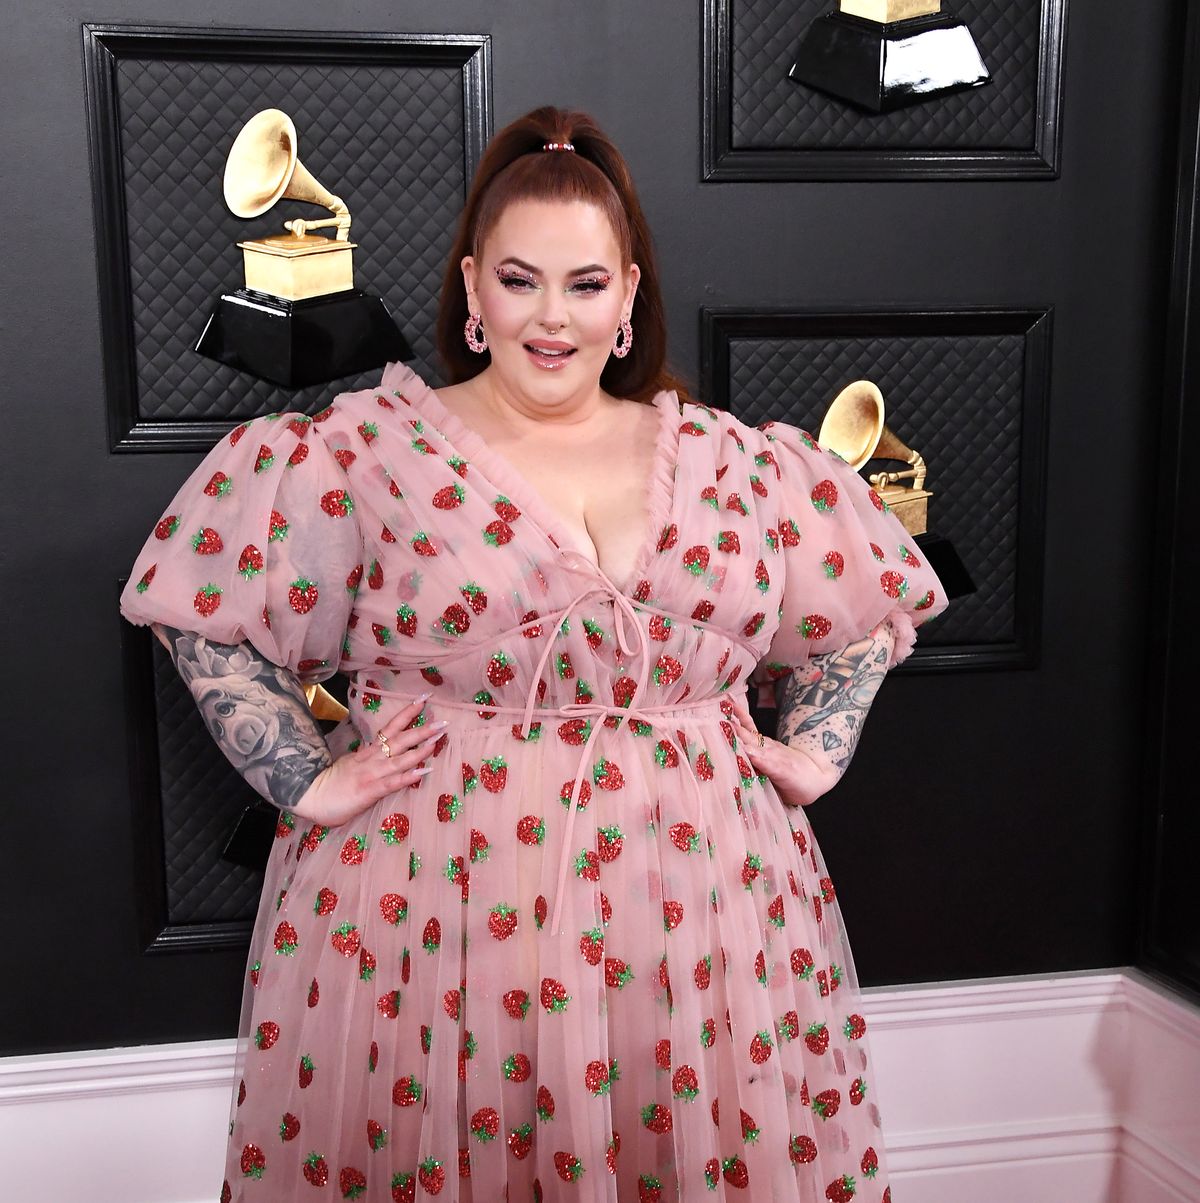 Tess Holliday Talks About Lizzo on the 2020 Grammys Red Carpet